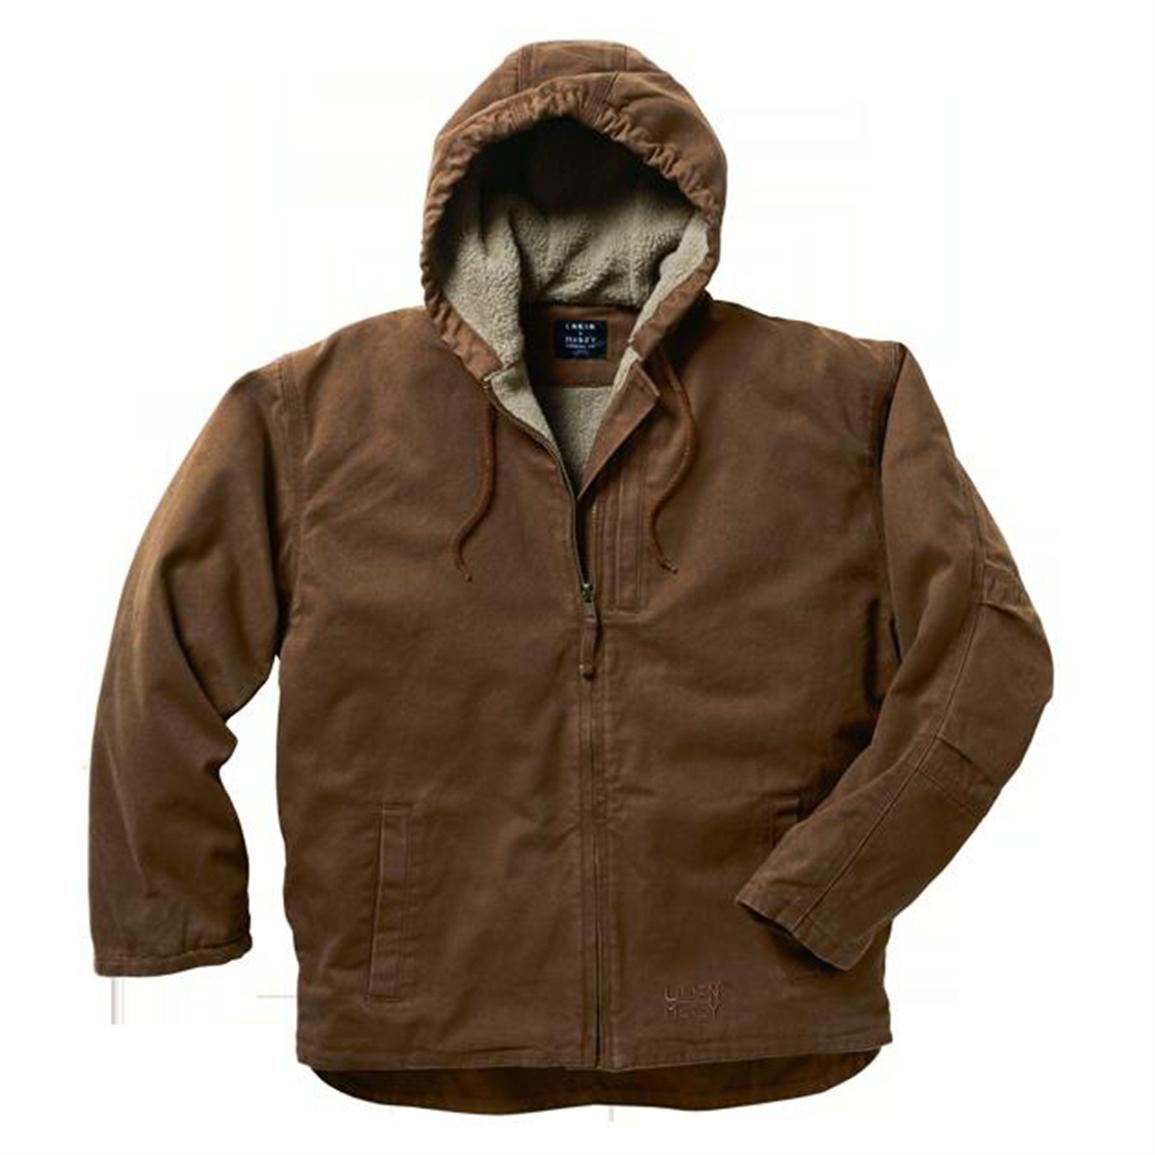 Lakin McKey® Premium Berber - lined Hooded Jacket - 191986, Insulated ...